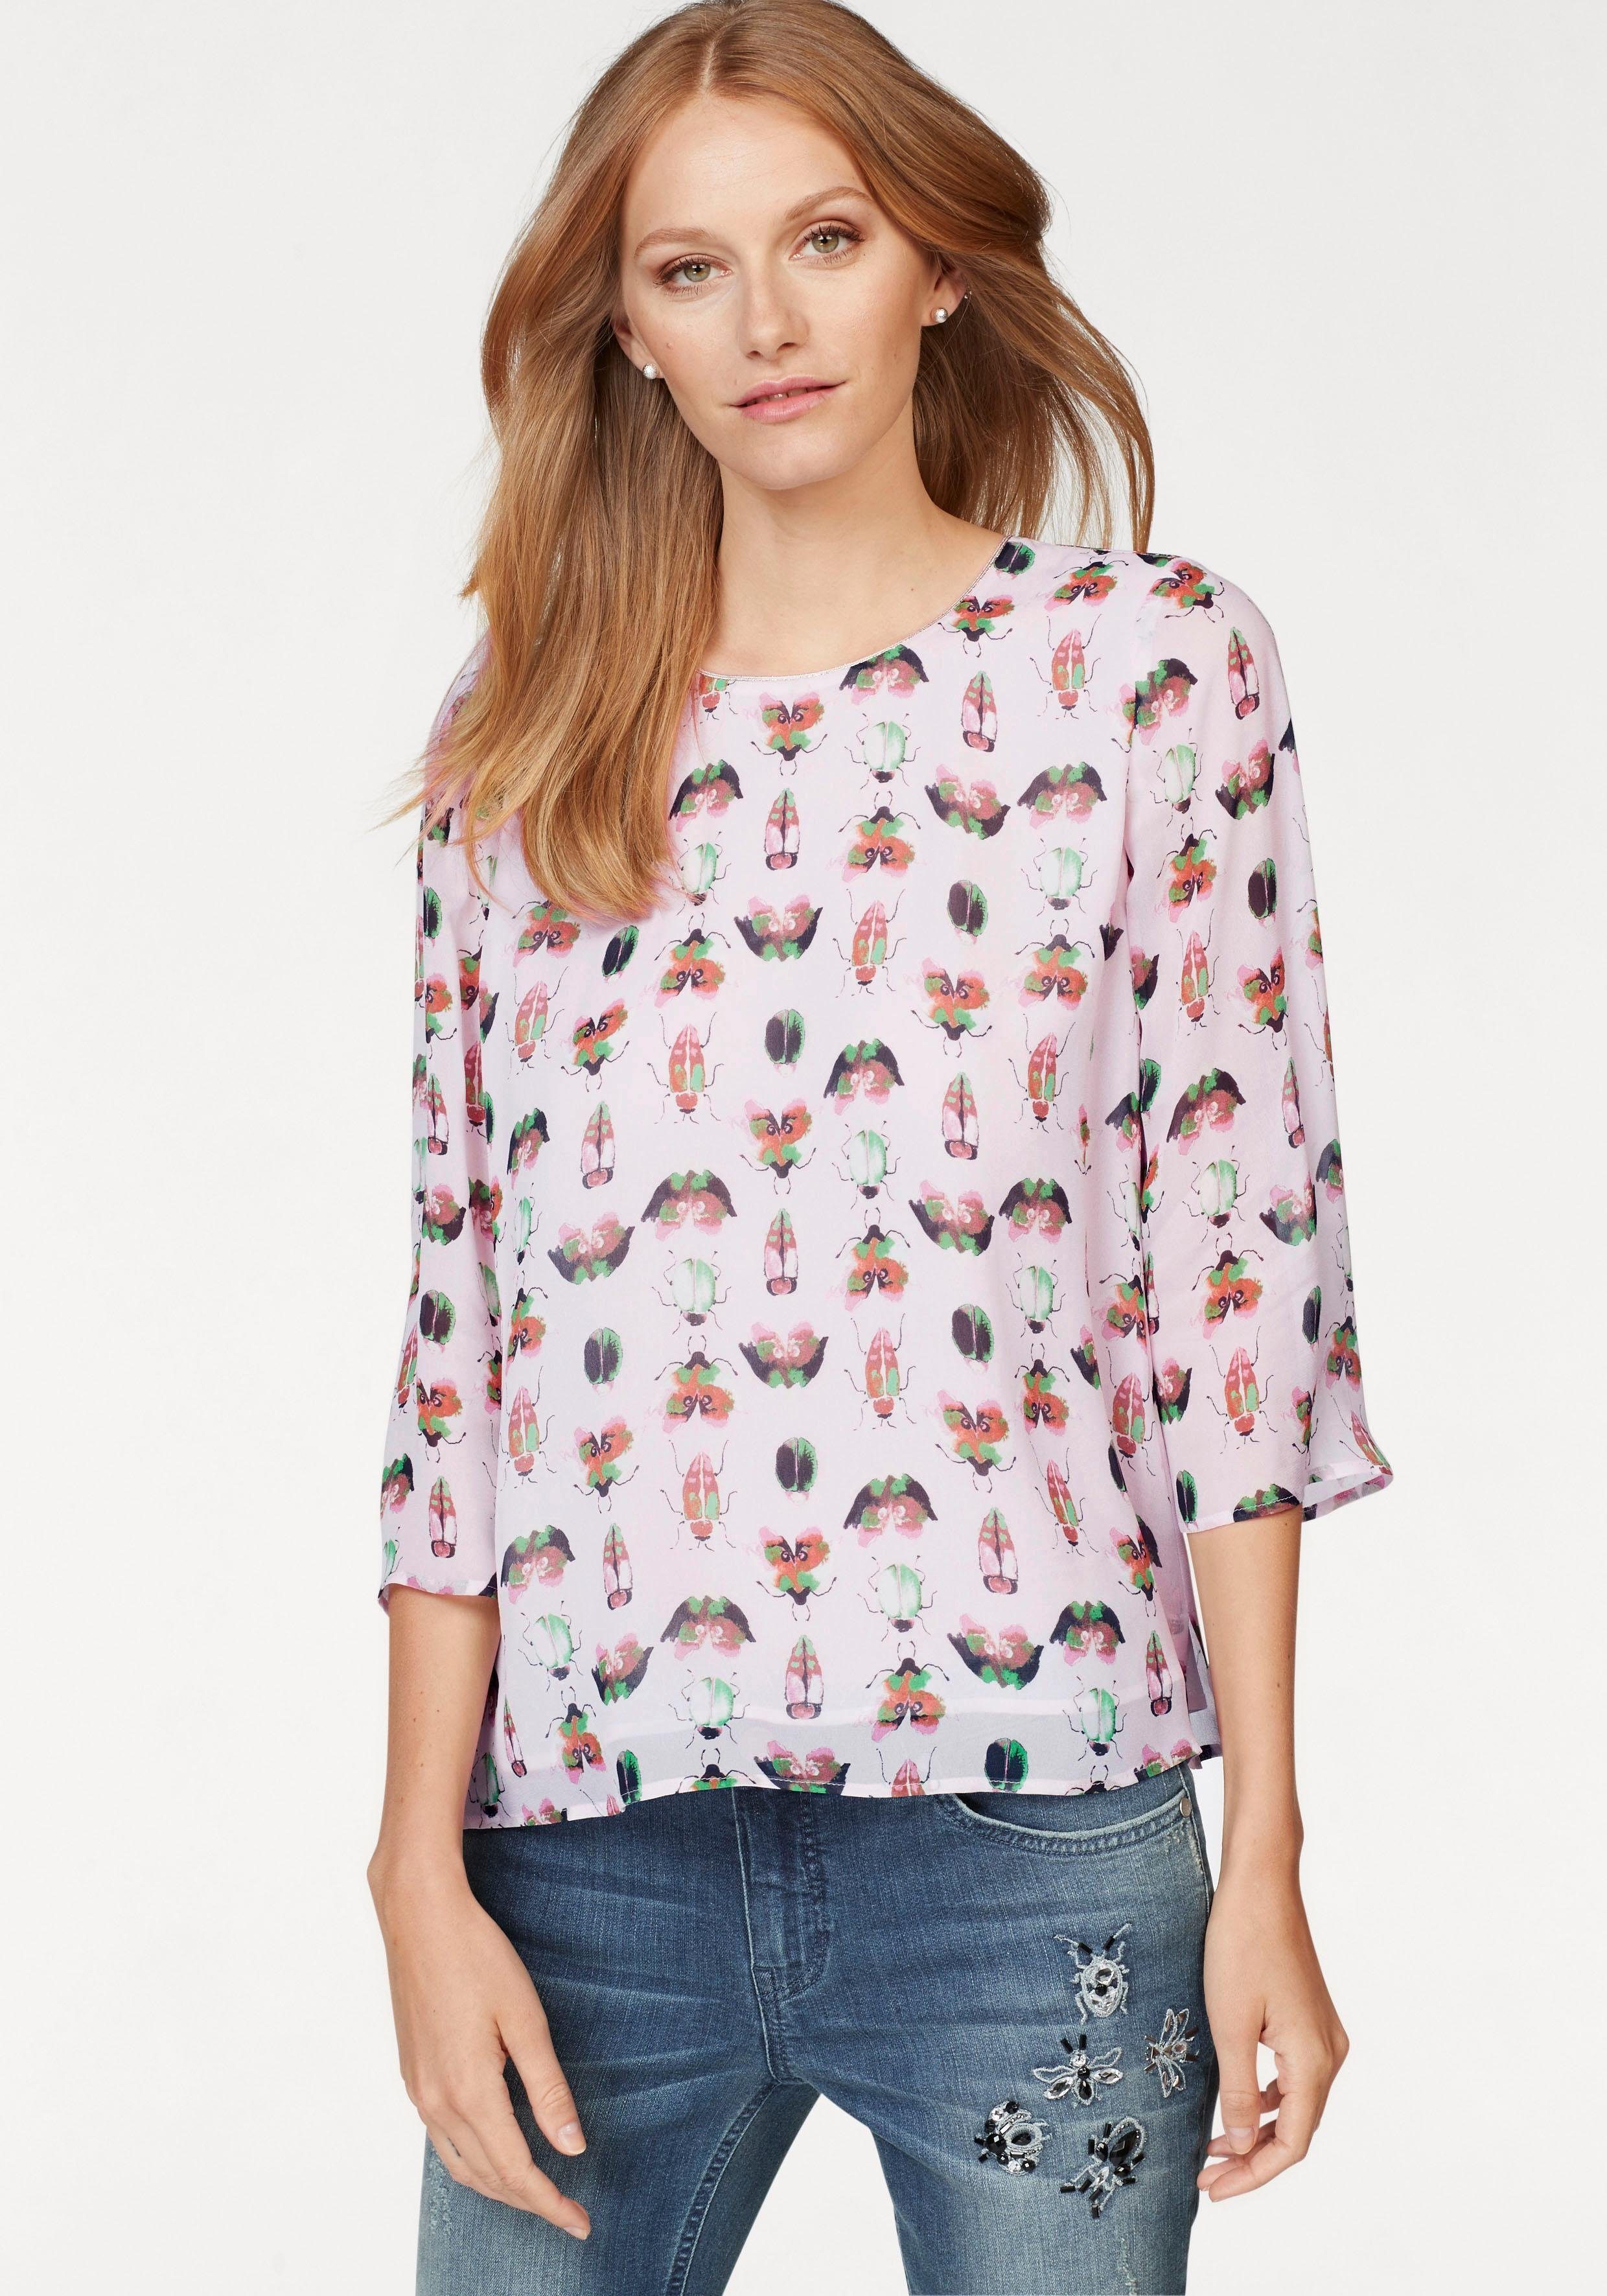 Talk About NU 15% KORTING: talk about blouse zonder sluiting